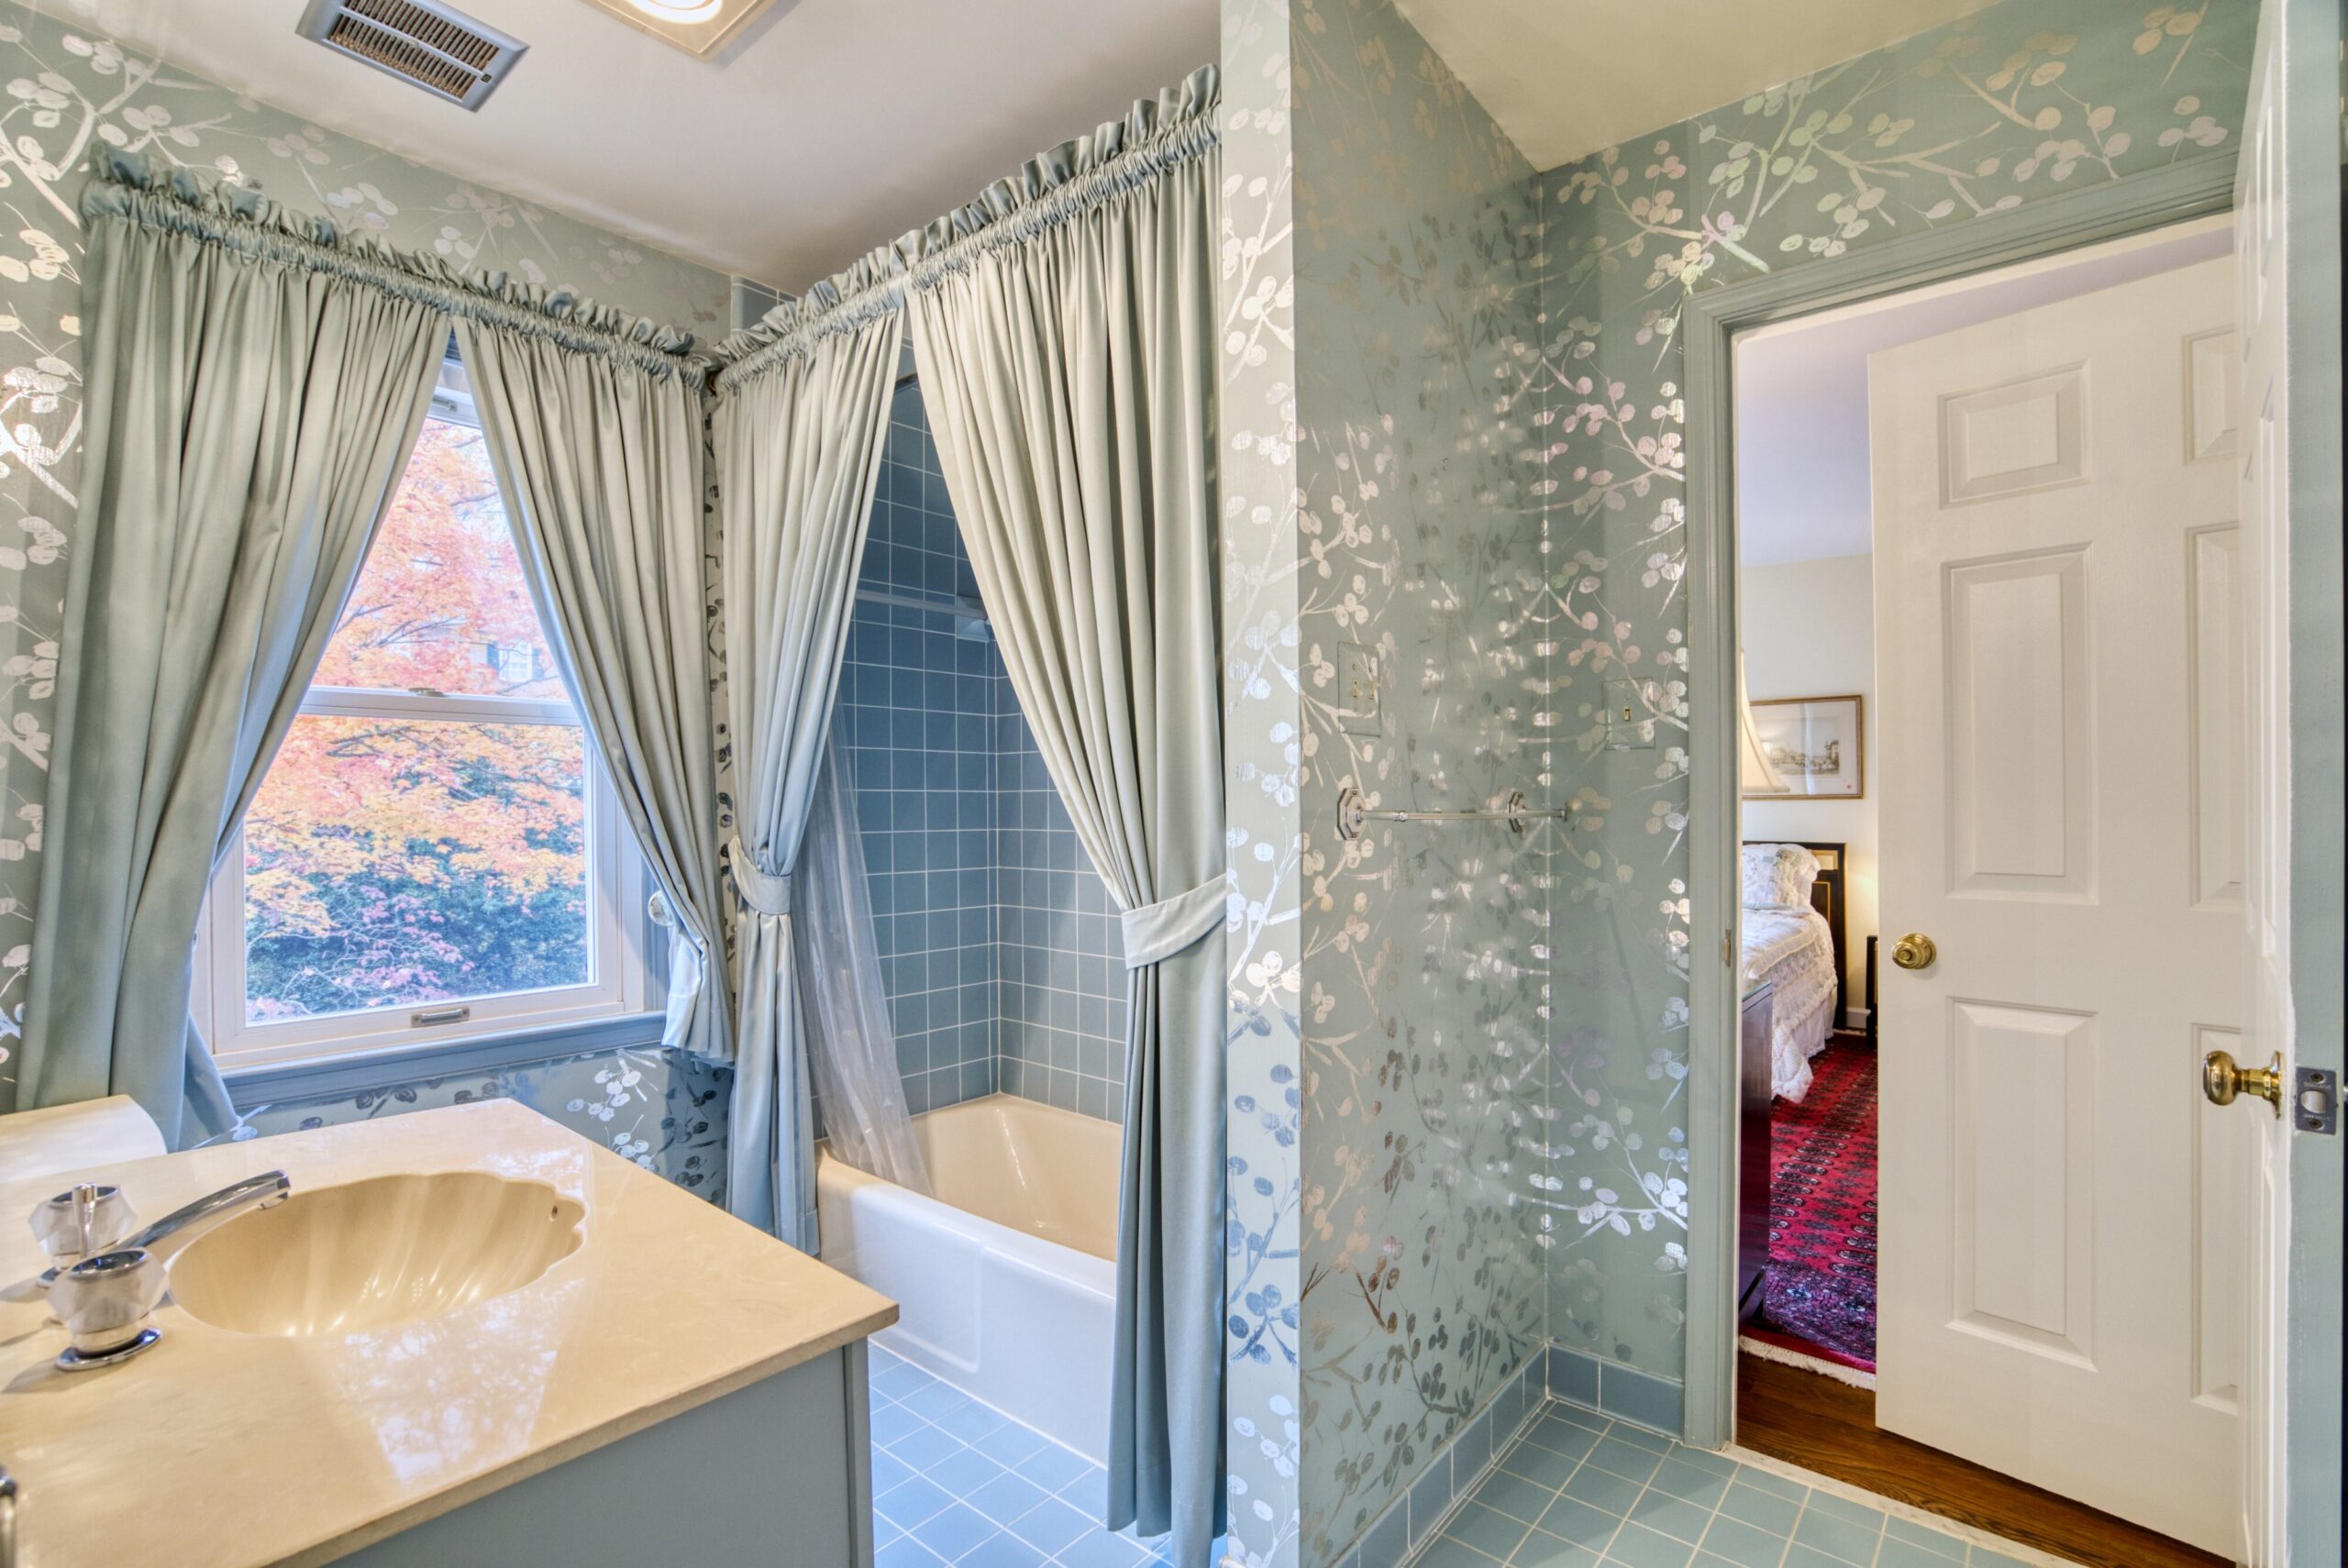 Interior professional photo of 1324 Skipwith Road - a full bathroom with antique blue shiny wallpaper and long window and shower curtains